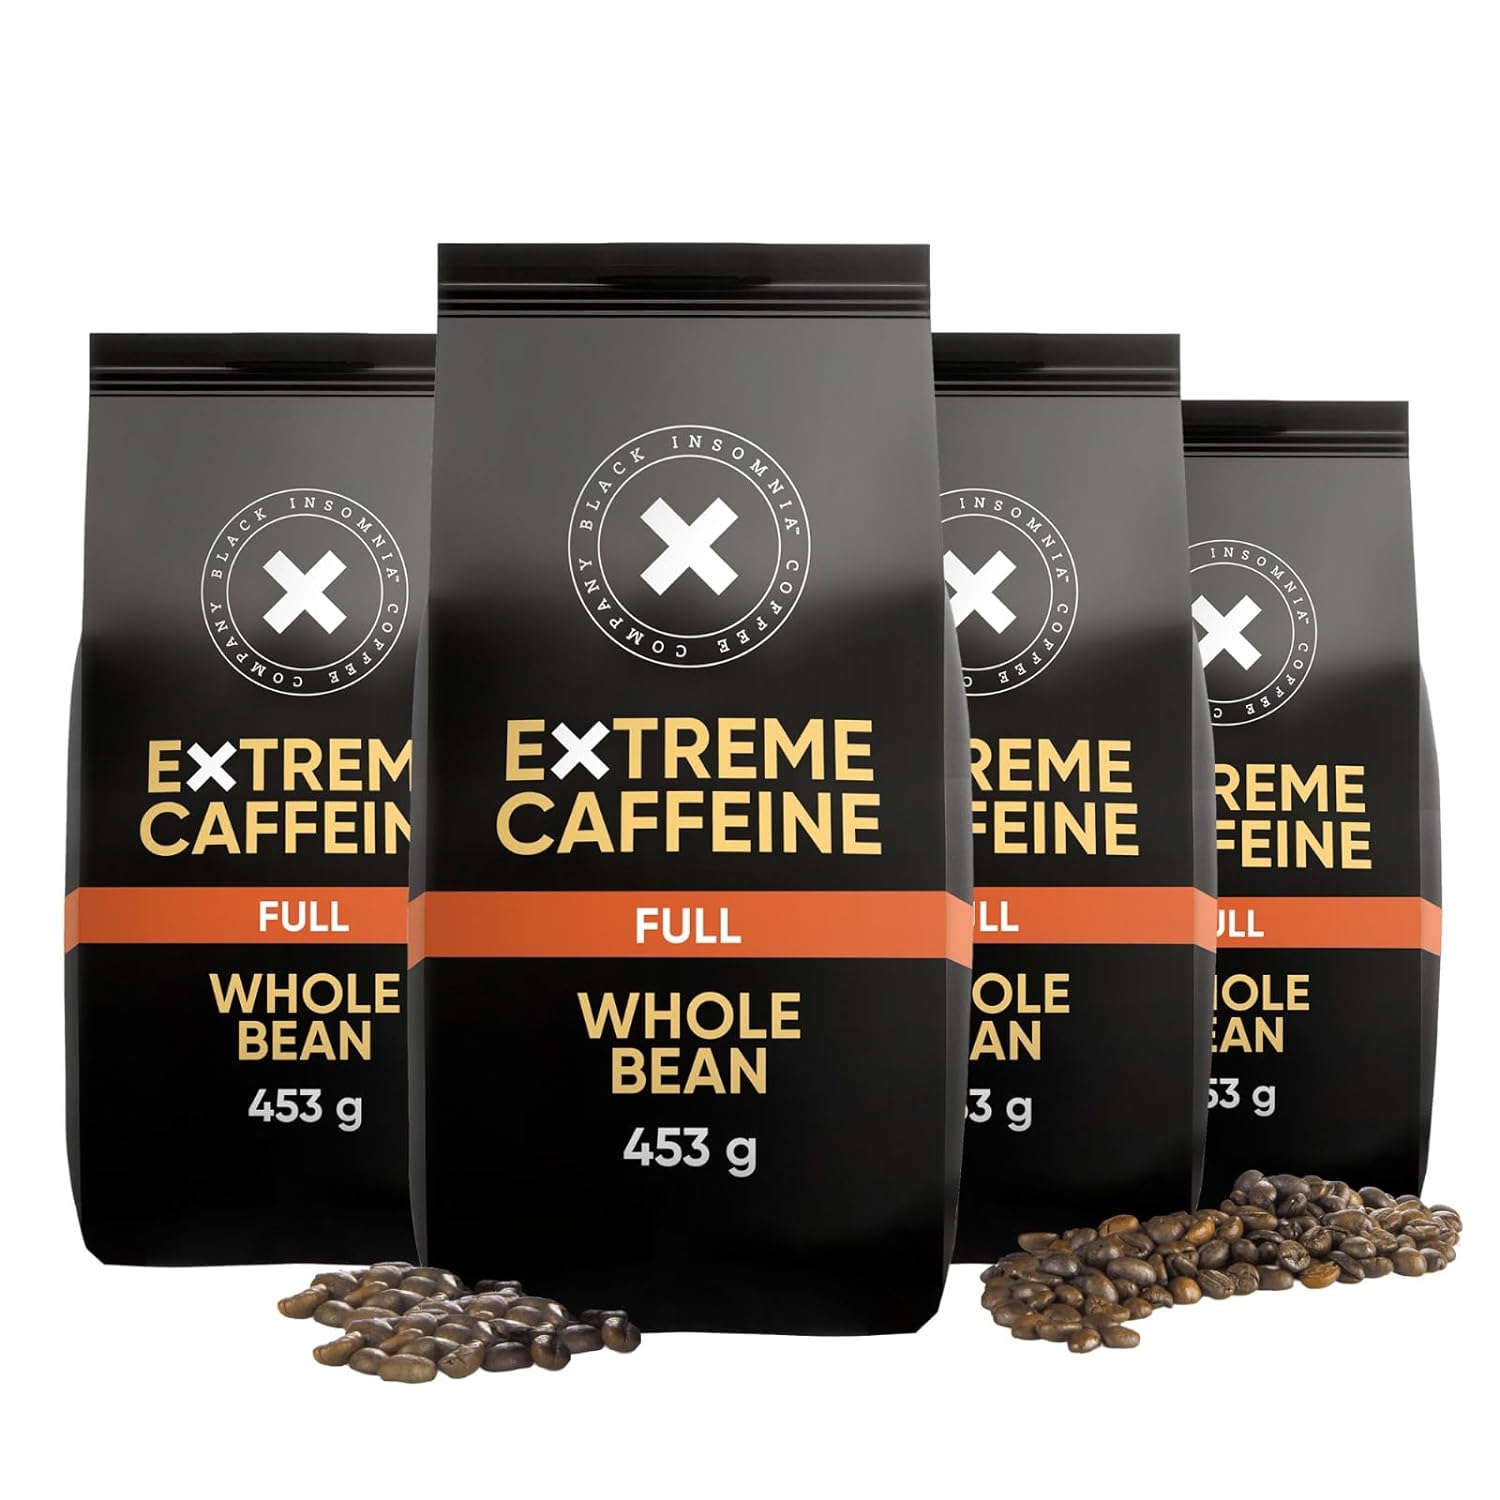 4 x Black Insomnia coffee beans extra strong I 1105mg caffeine per cup - strongest coffee in the world I 100% Robusta beans I Full Flavour, dark roast, low acidity I 4 x 453g (Full, 4 x 453g)
